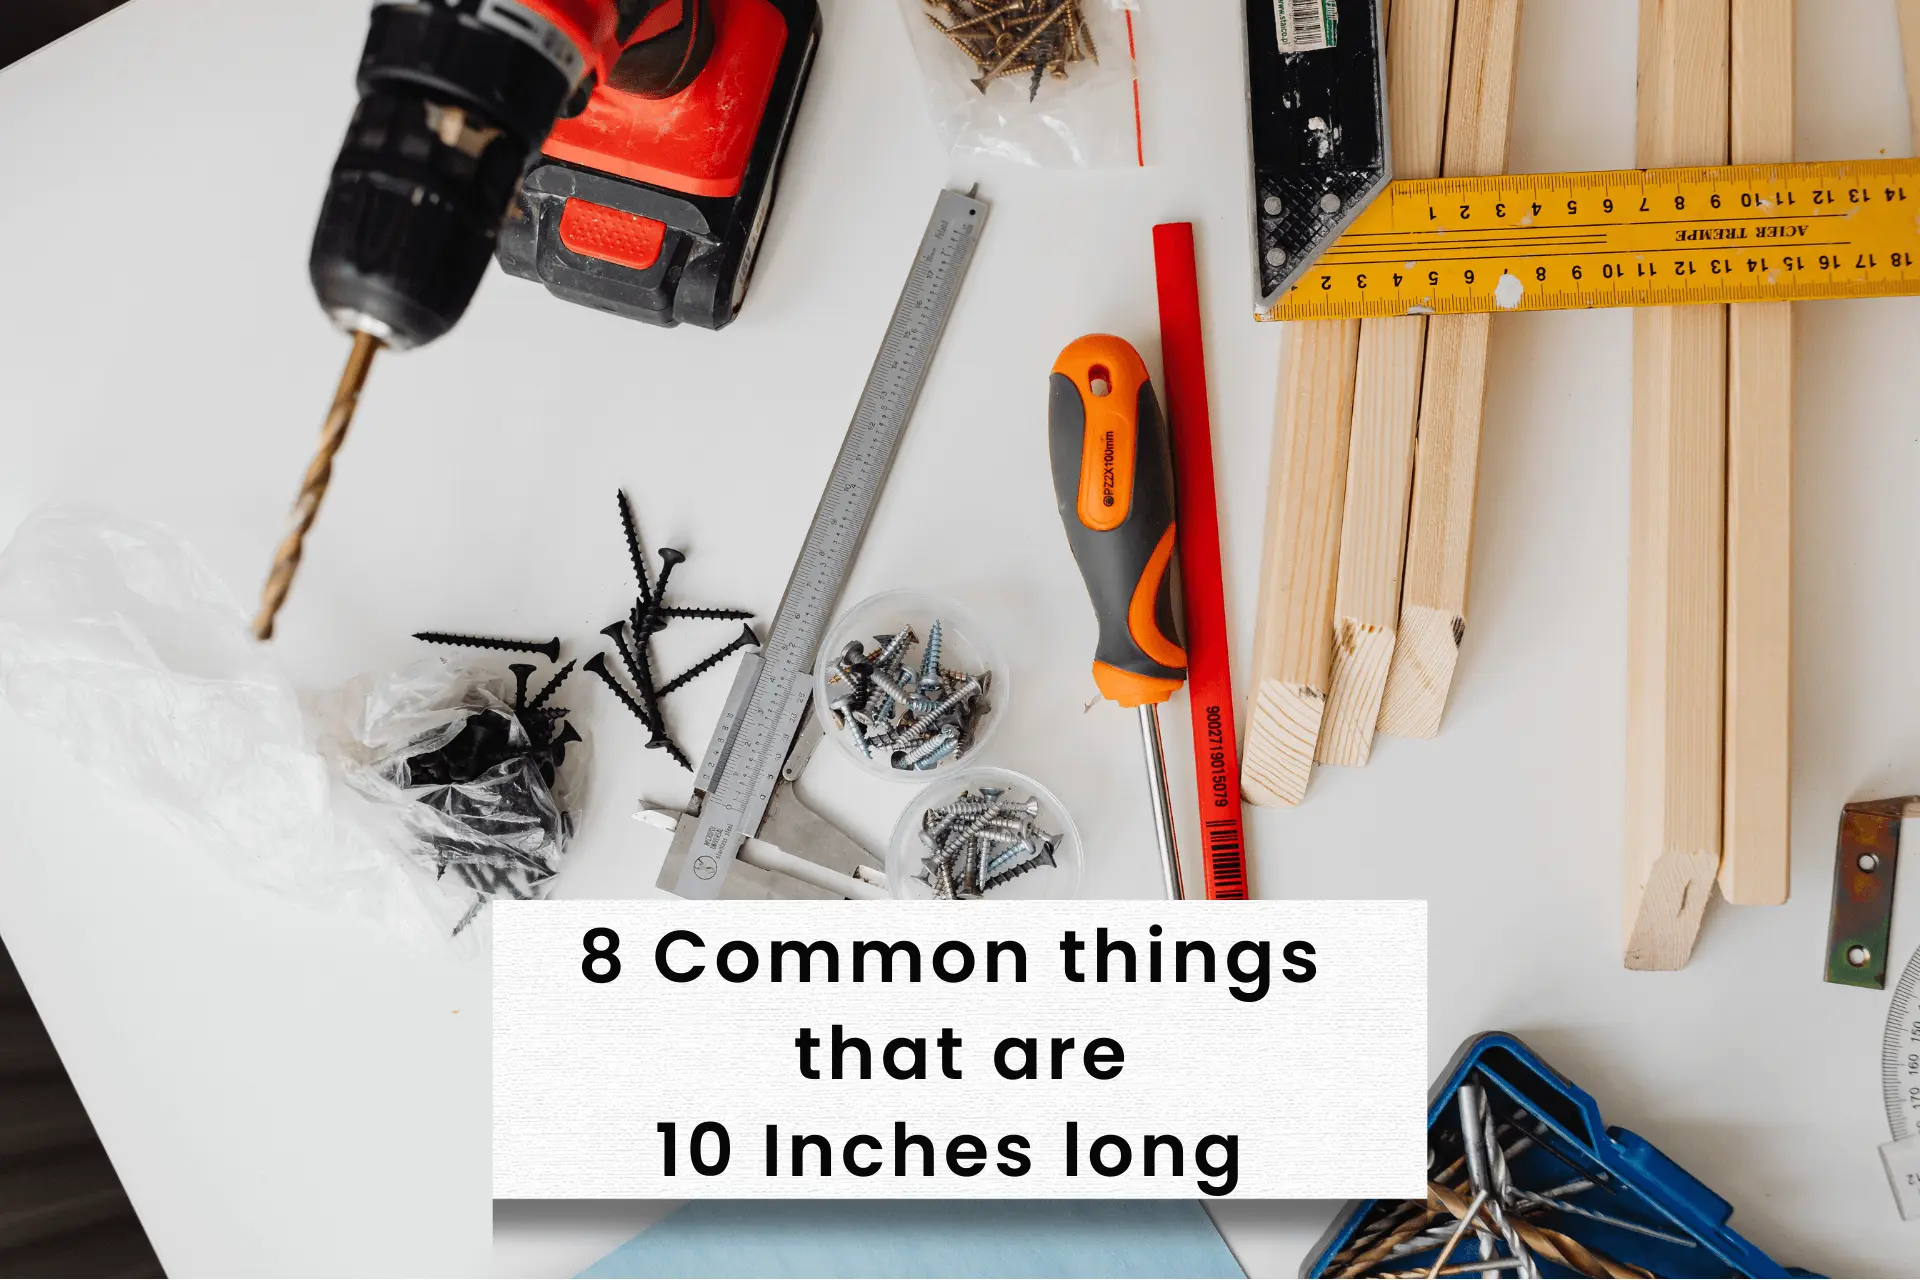 11 Common things that are 5 Inches long